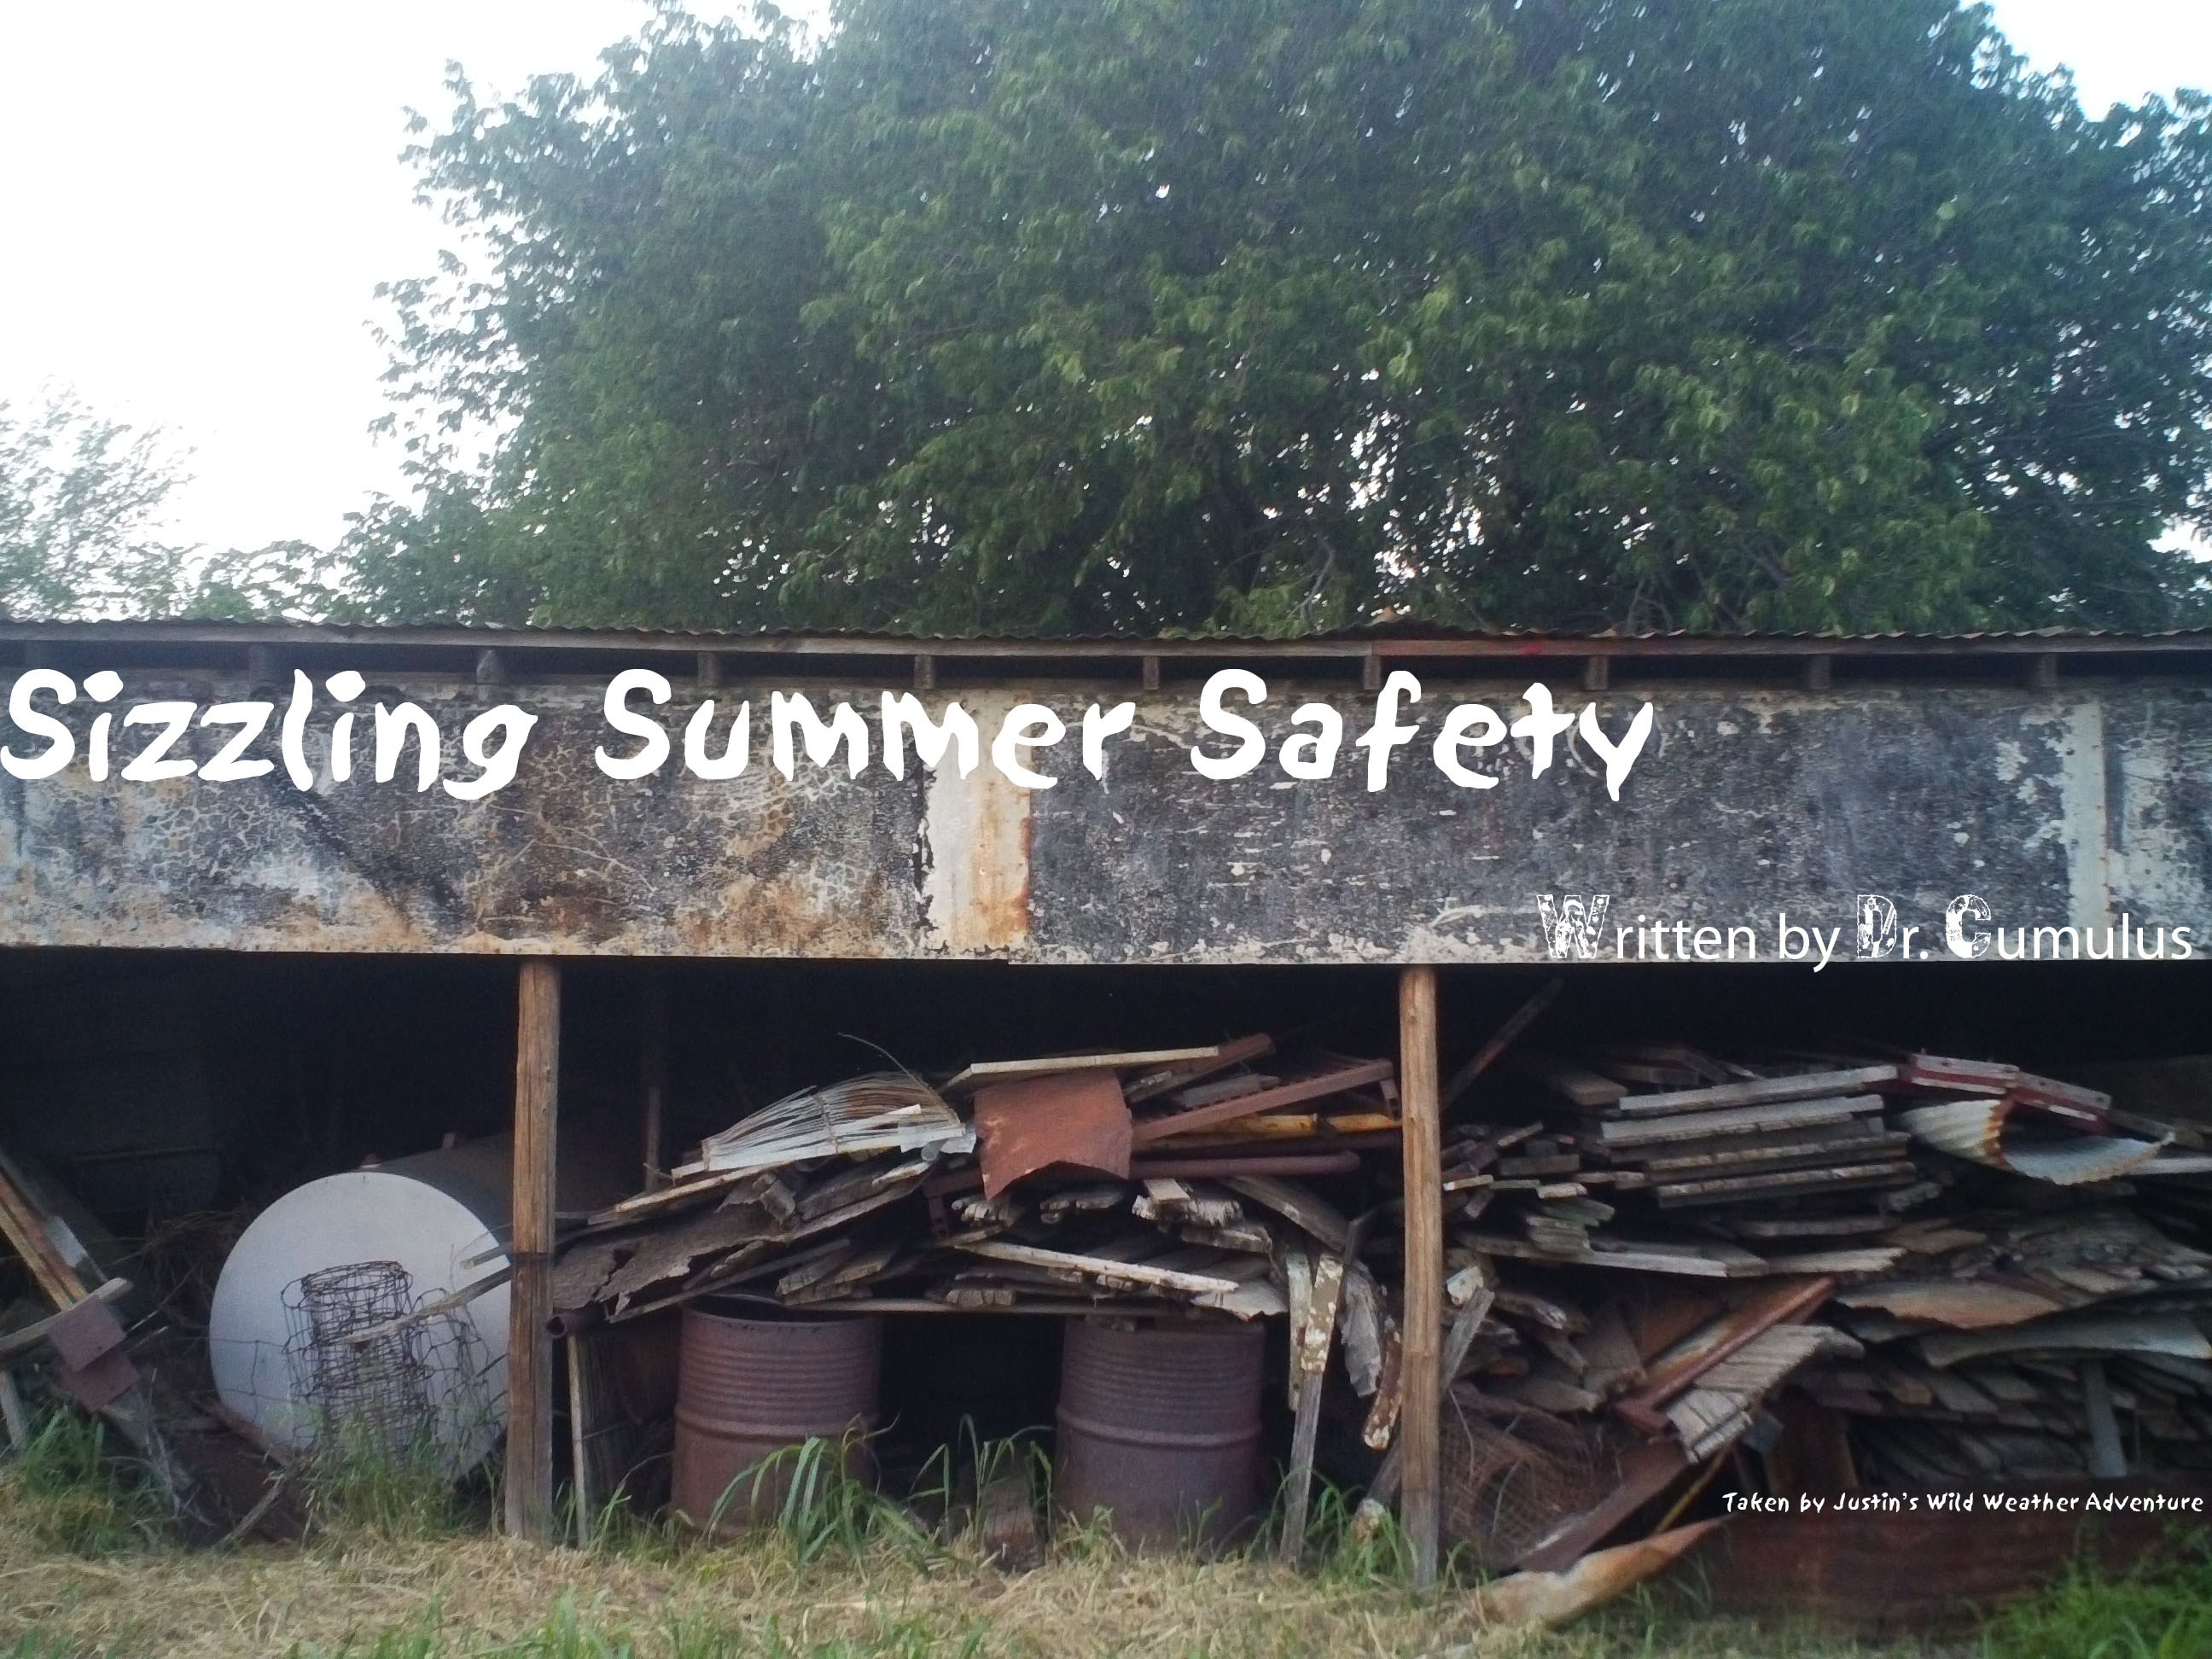 Dr. Cumulus: Sizzling Summer Safety